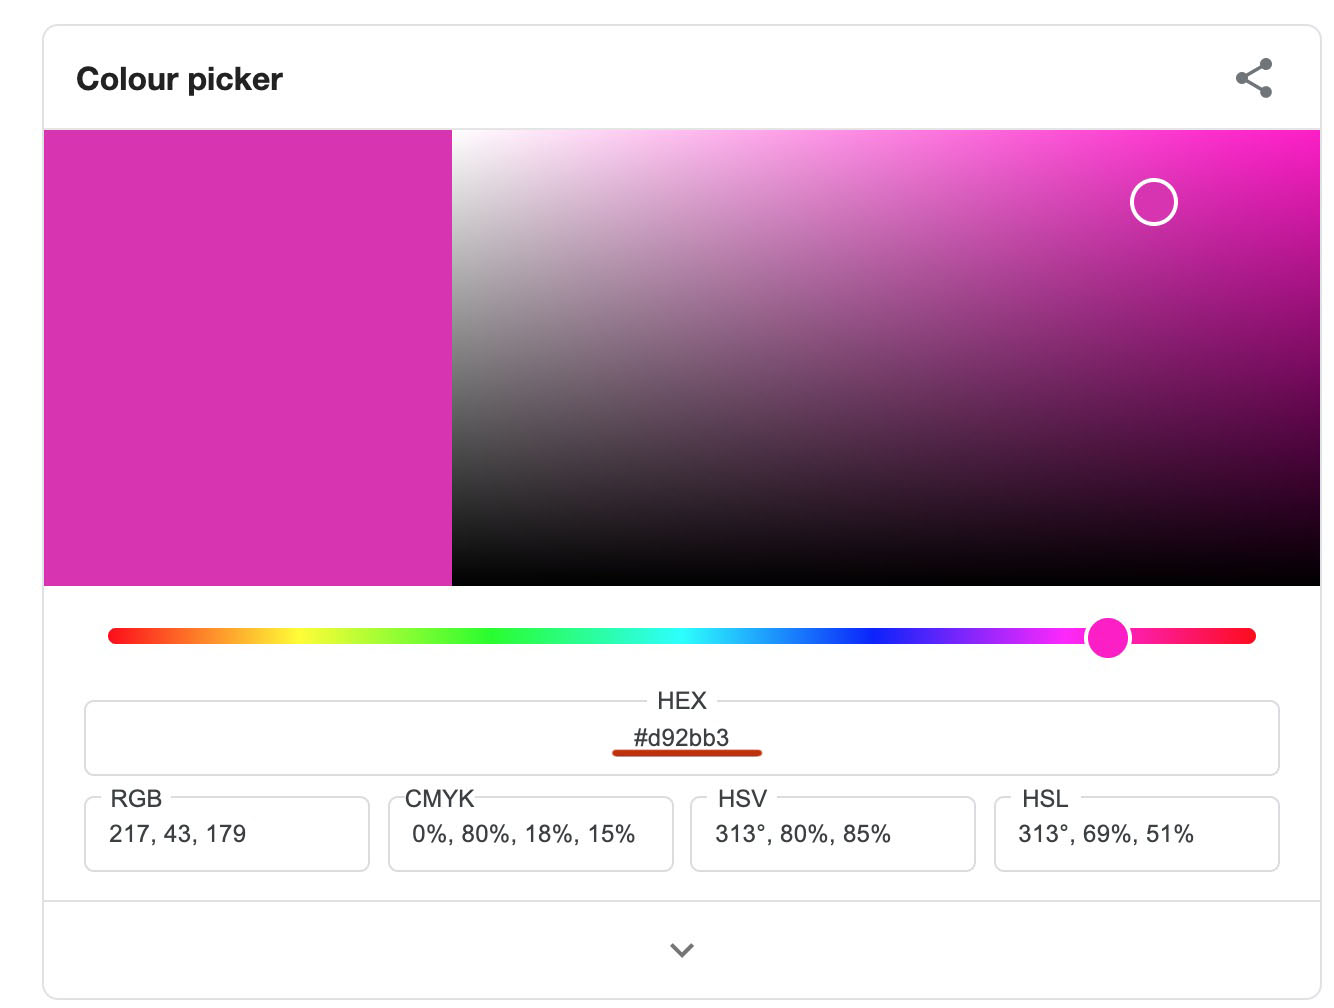 The color picker on Google